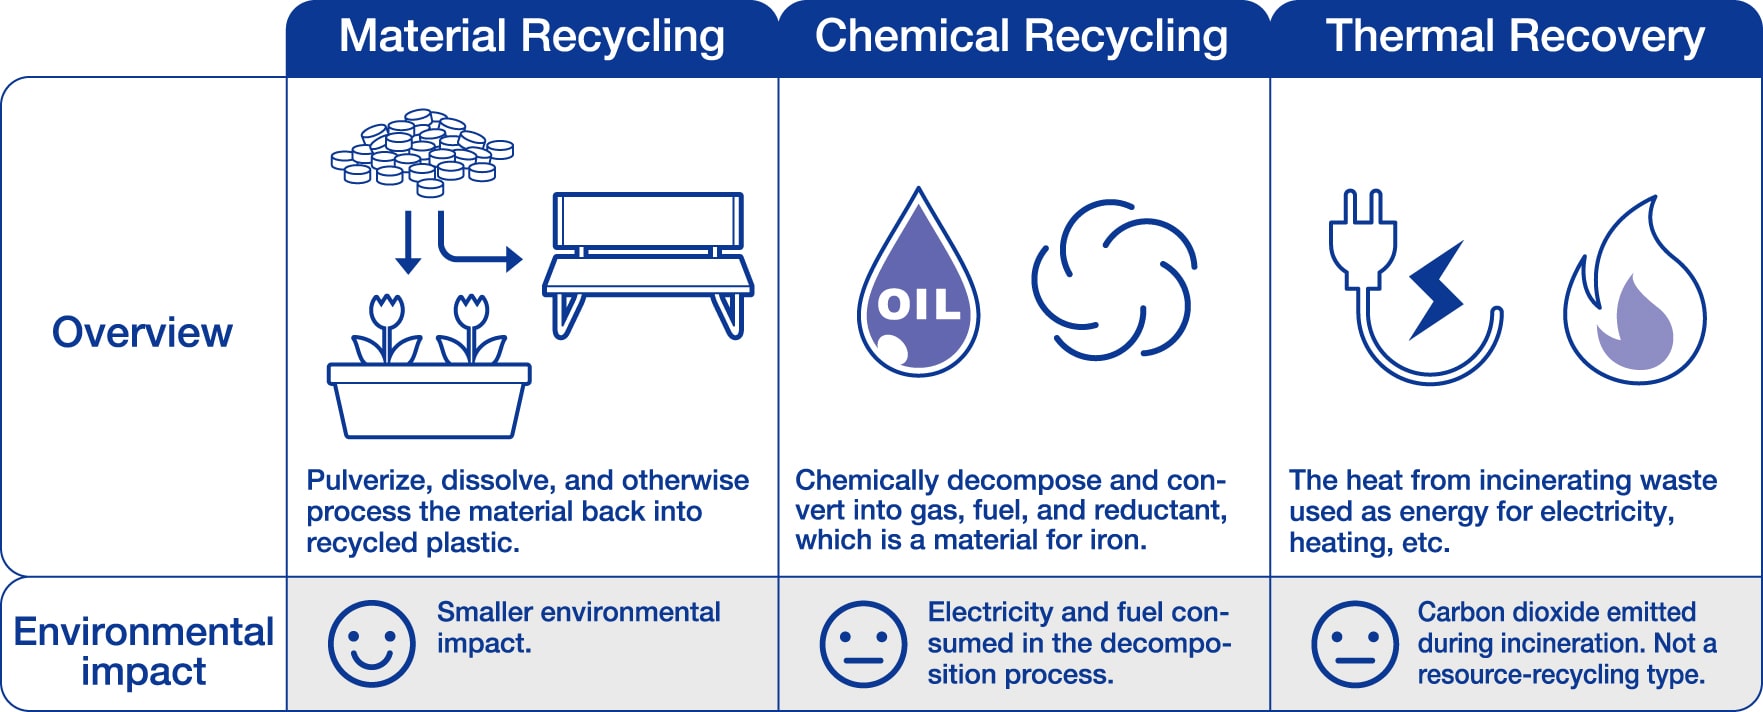 Mono-materials for a recycling-oriented society